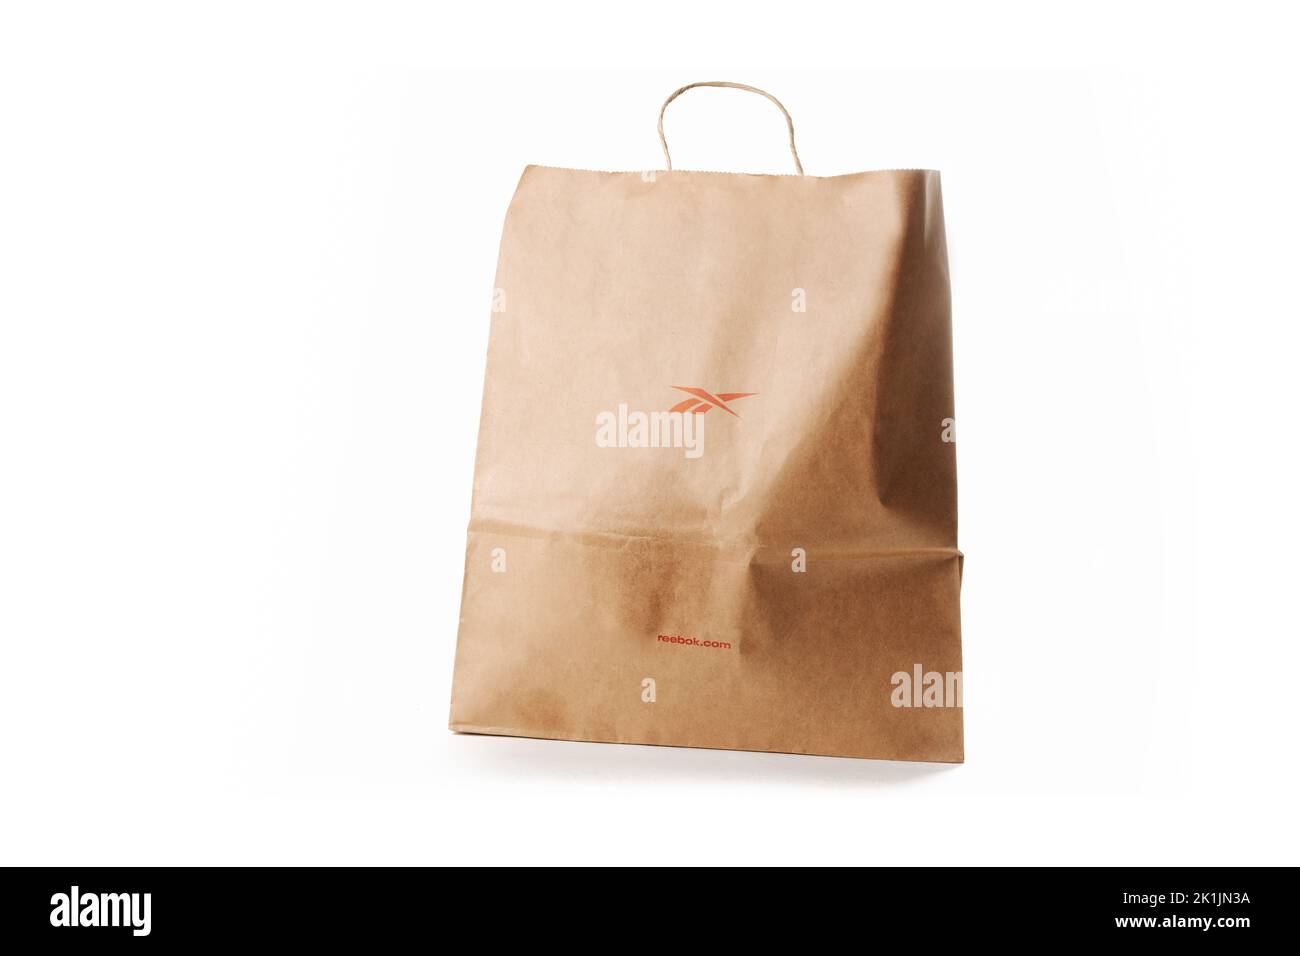 Cyprus, Paphos - SEPTEMBER 08, 2022: Reebok paper bag from famous sportswear brand. Over white background. Stock Photo